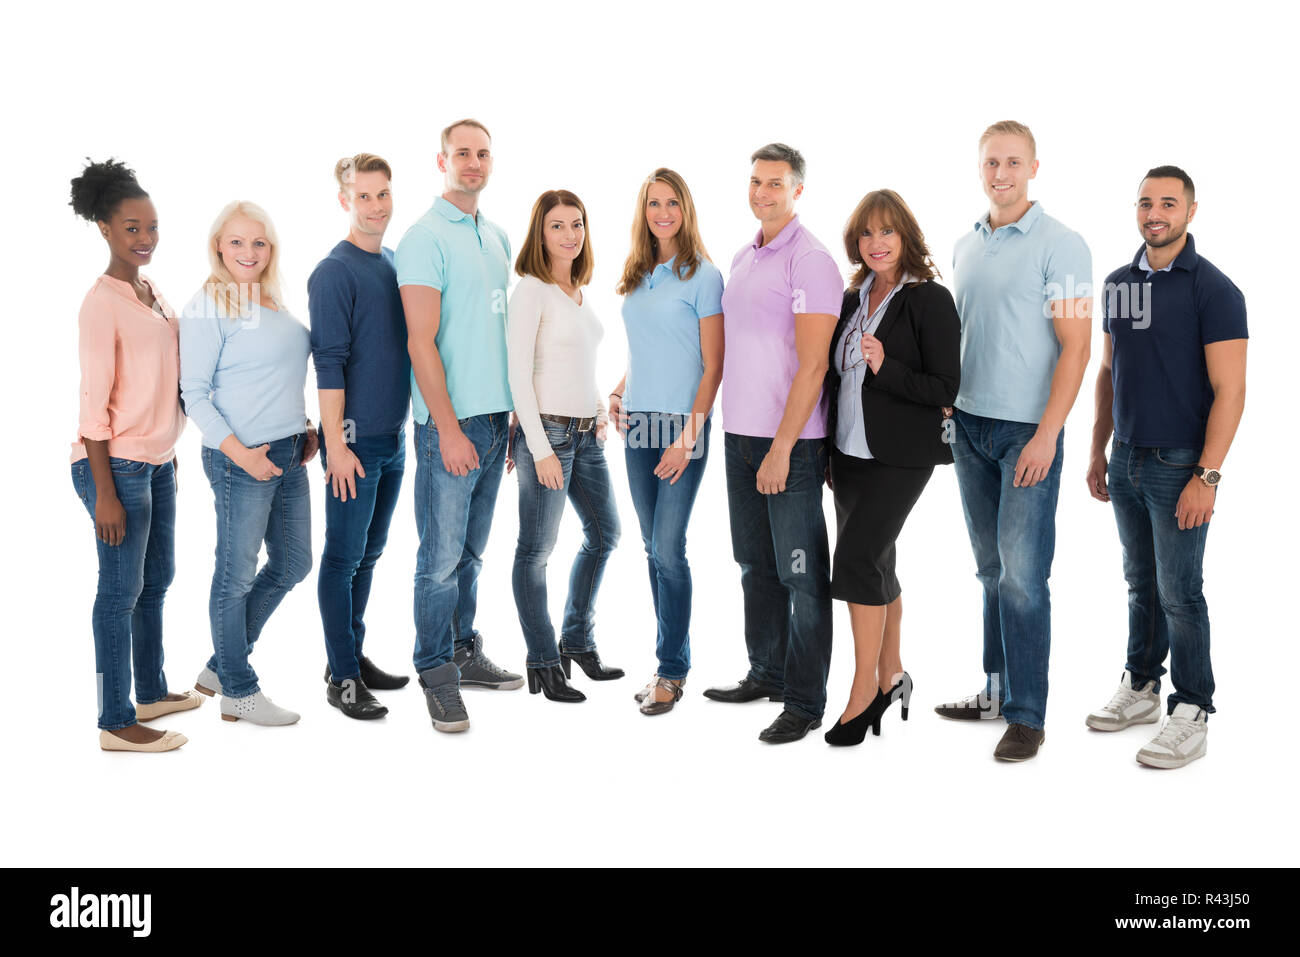 Portrait Of Creative Business People Standing Together Stock Photo